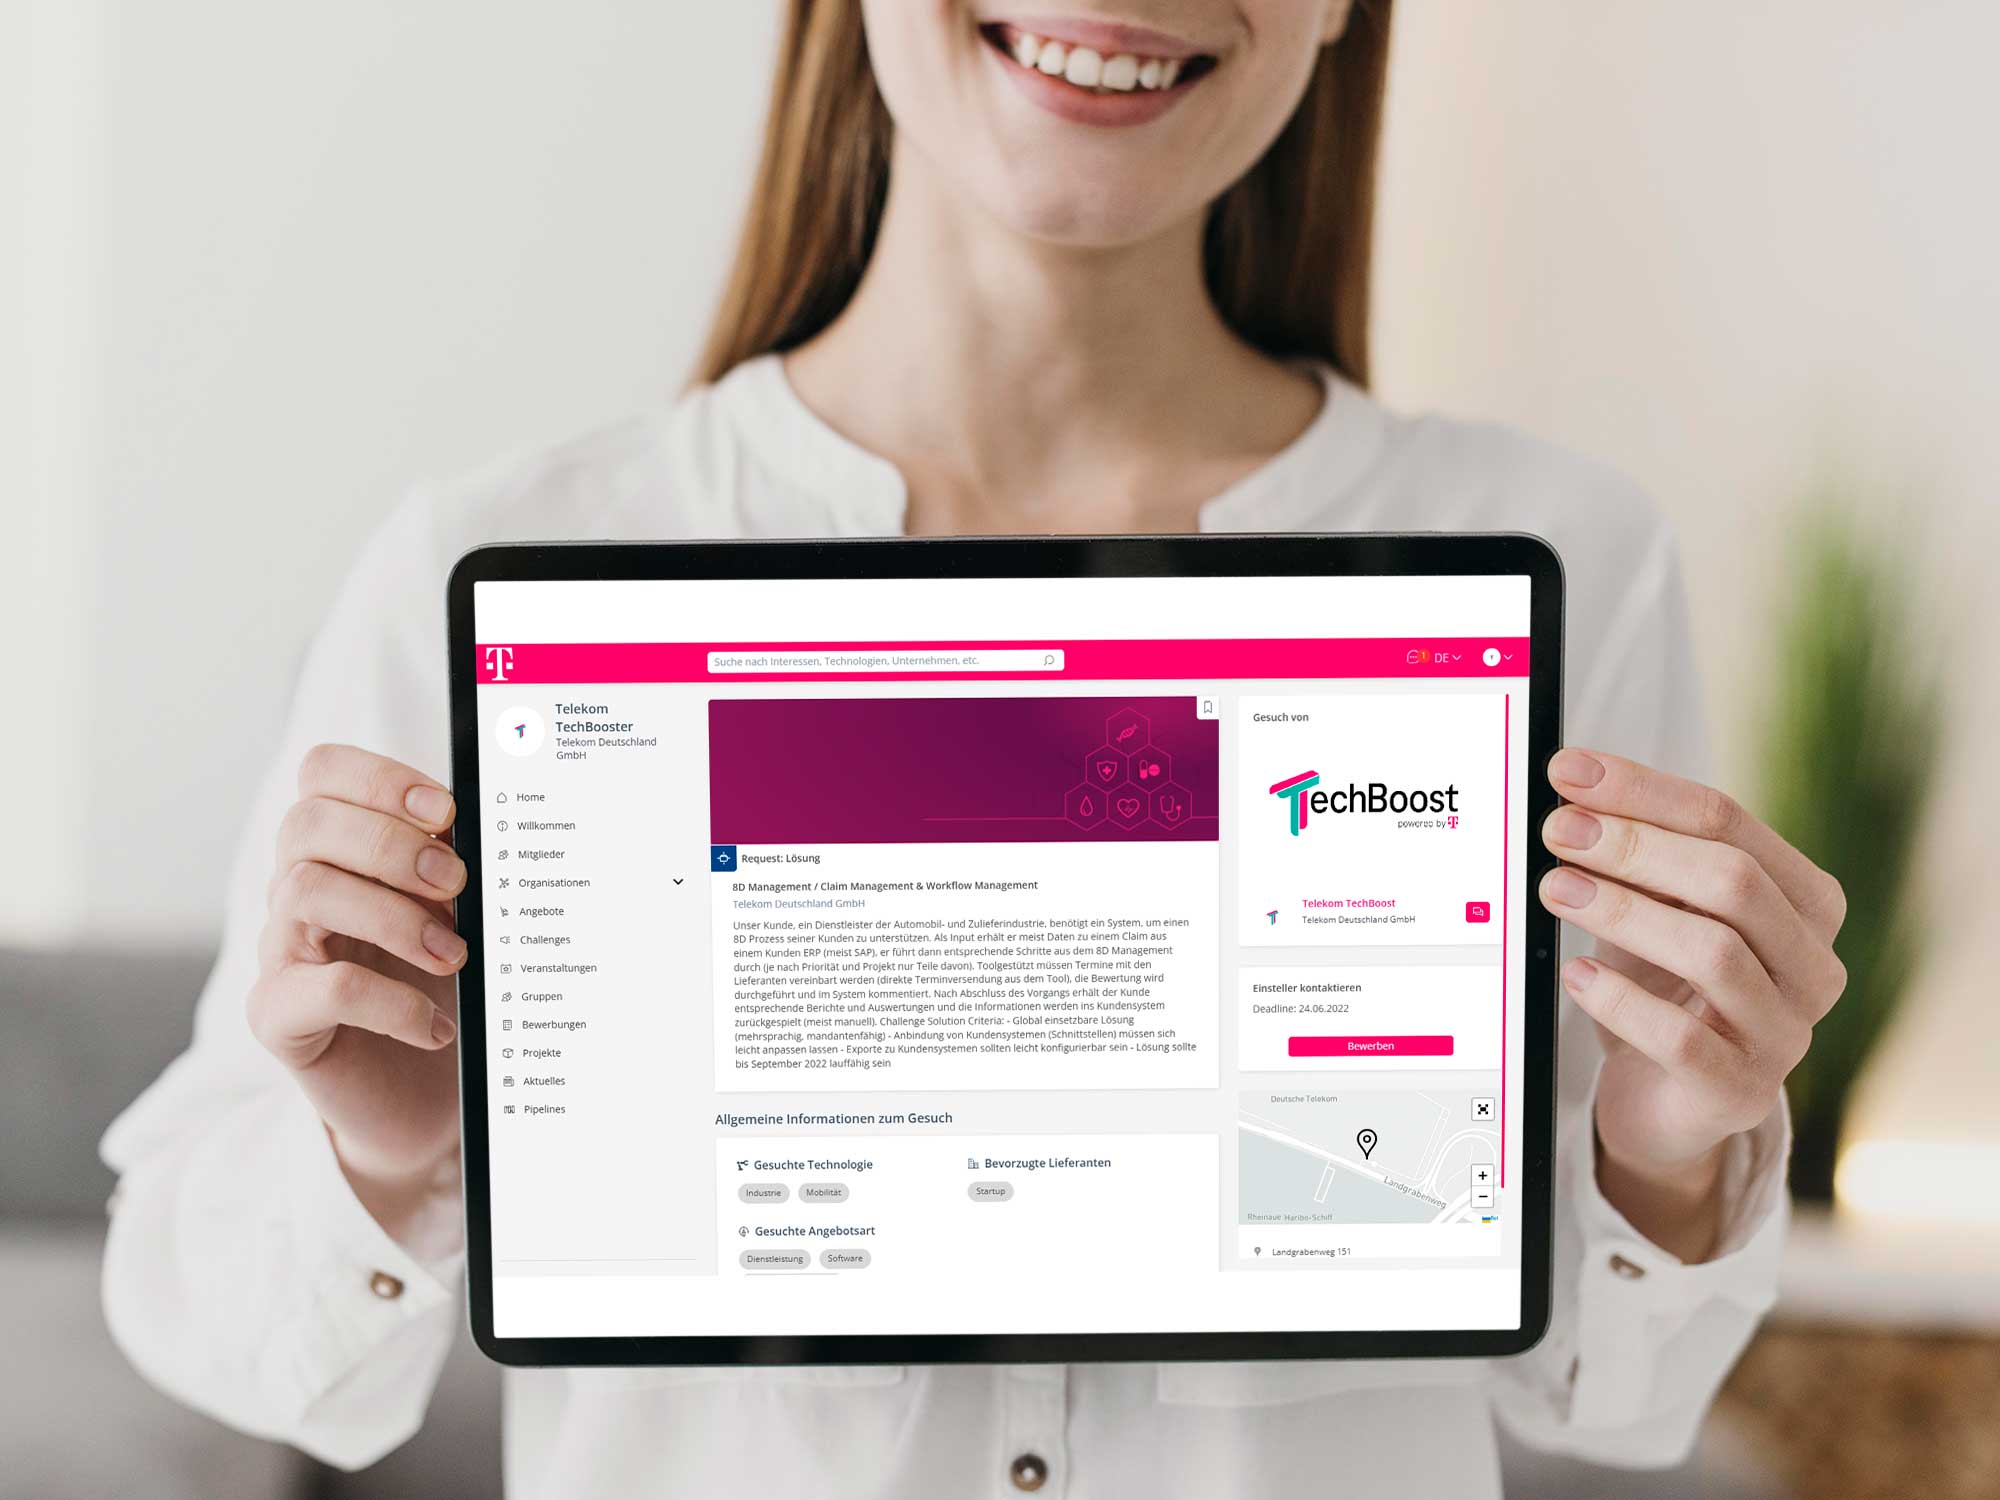 A woman presents a tablet on which the Techboost platform can be seen.